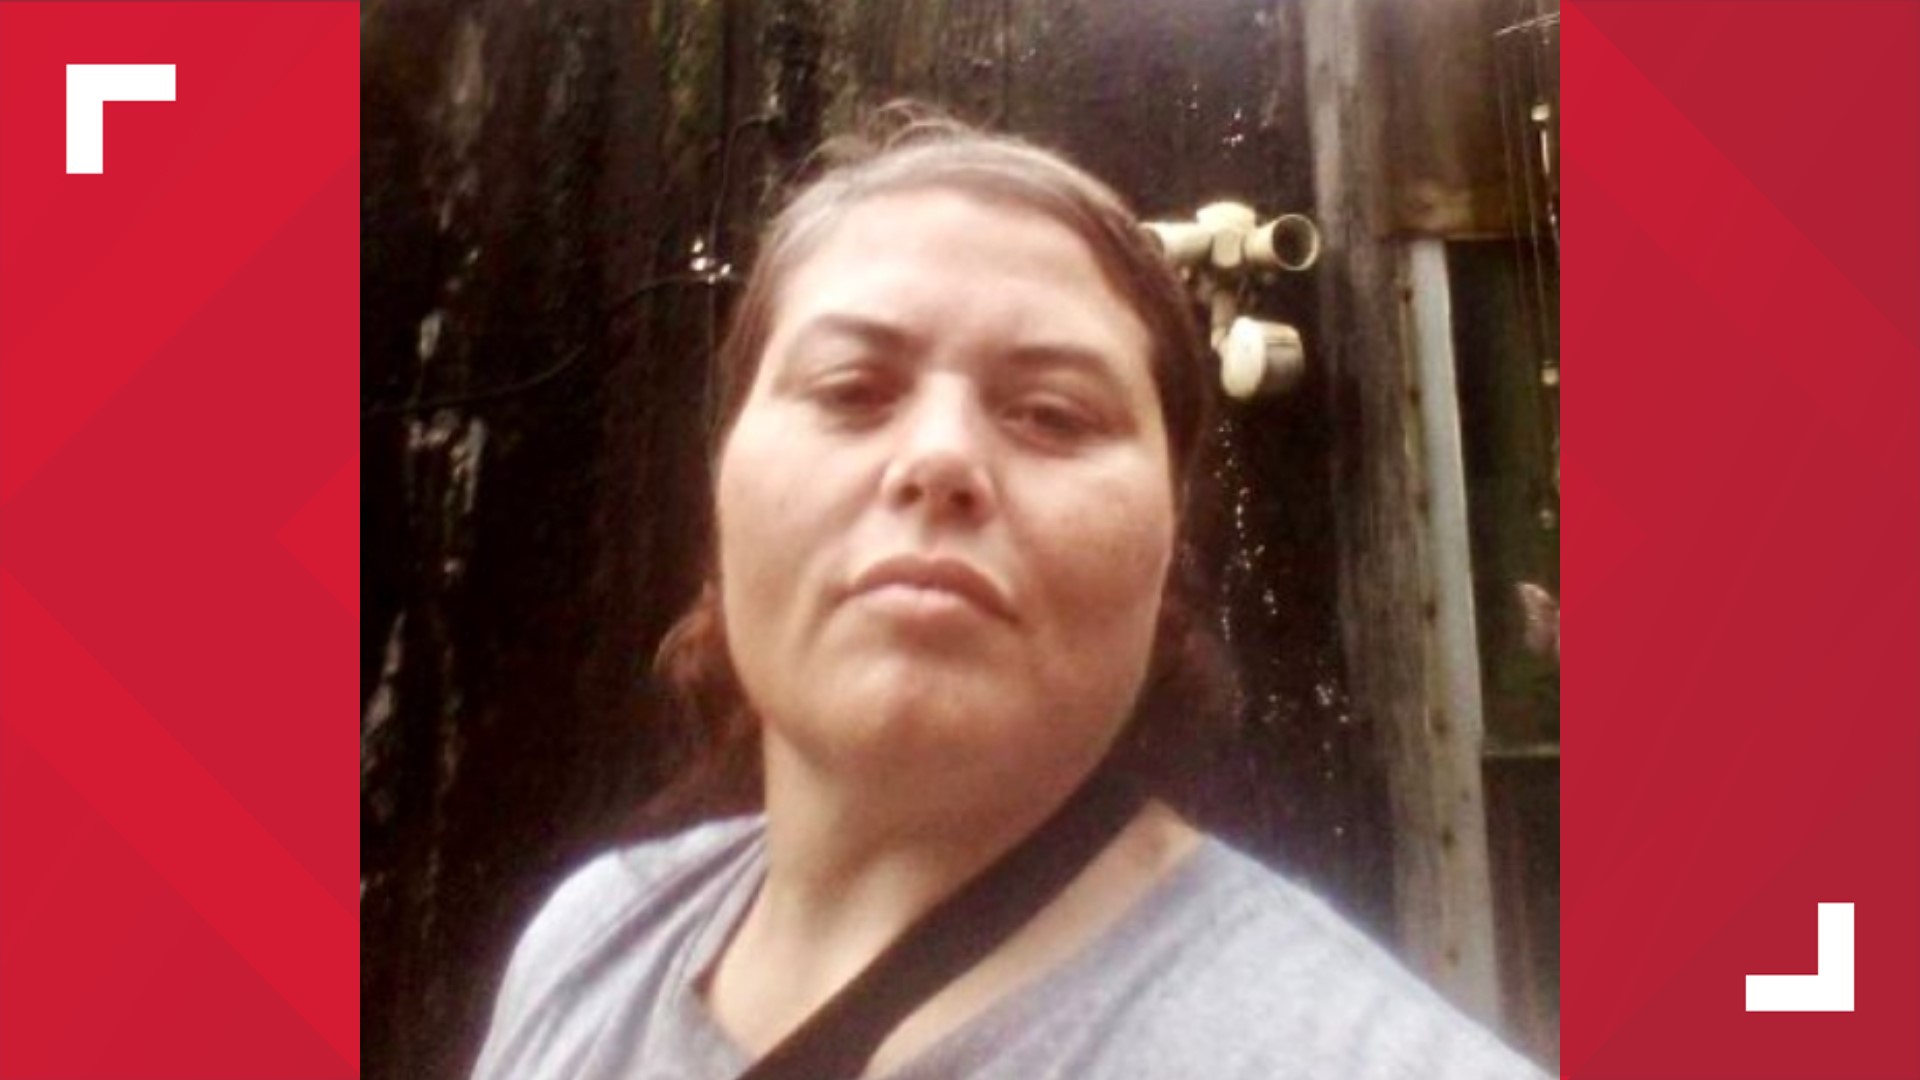 Angela Ingle was struck and killed by vehicle on Geyer Springs Road on Saturday, Feb. 12.